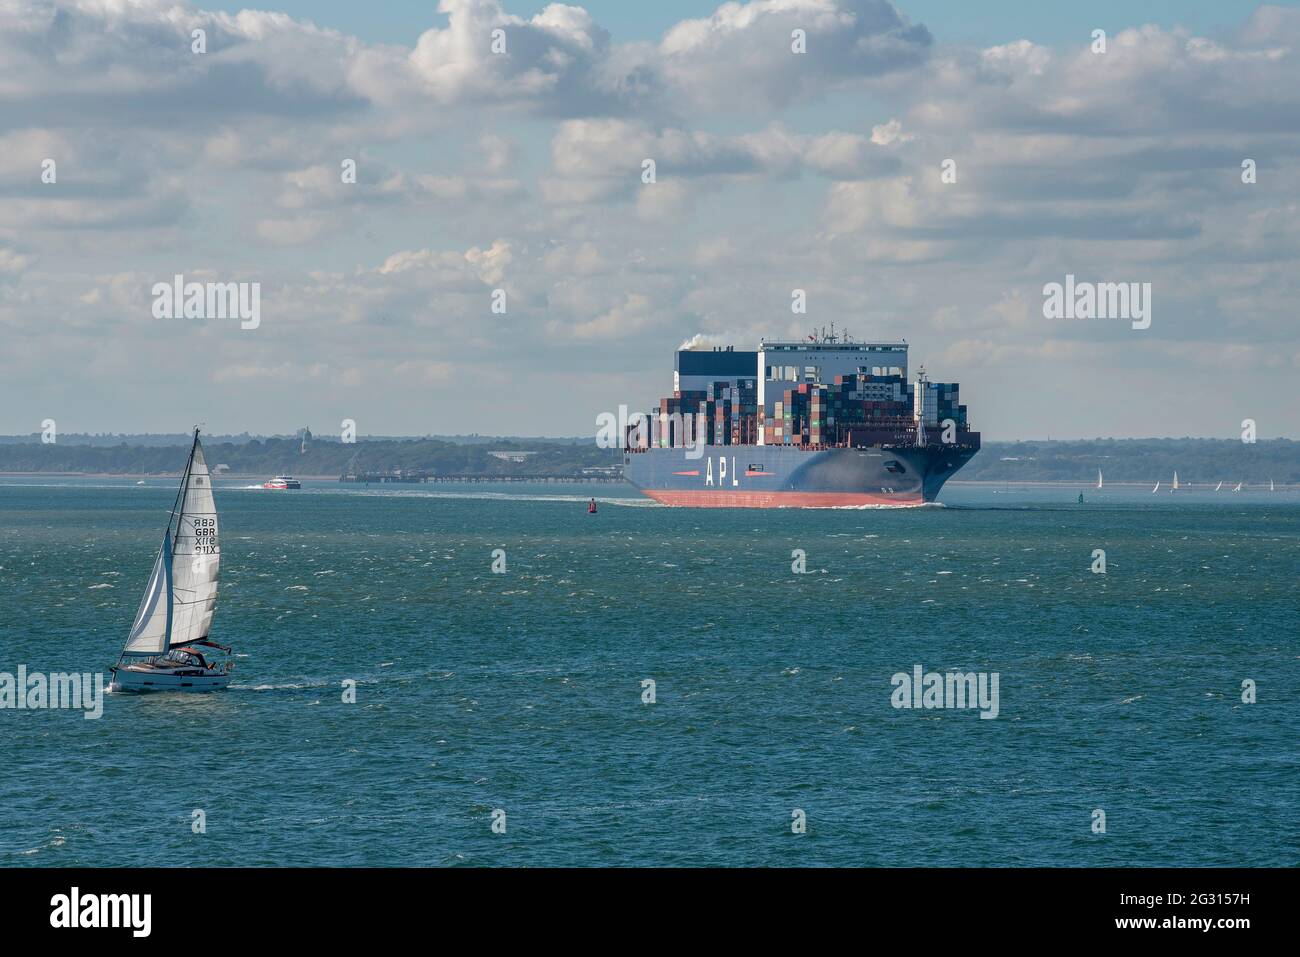 Southampton Water, England, UK. 2021. The container carrier ship APL Vanda underway southbound on Southampton Water approaching a small yacht. Stock Photo